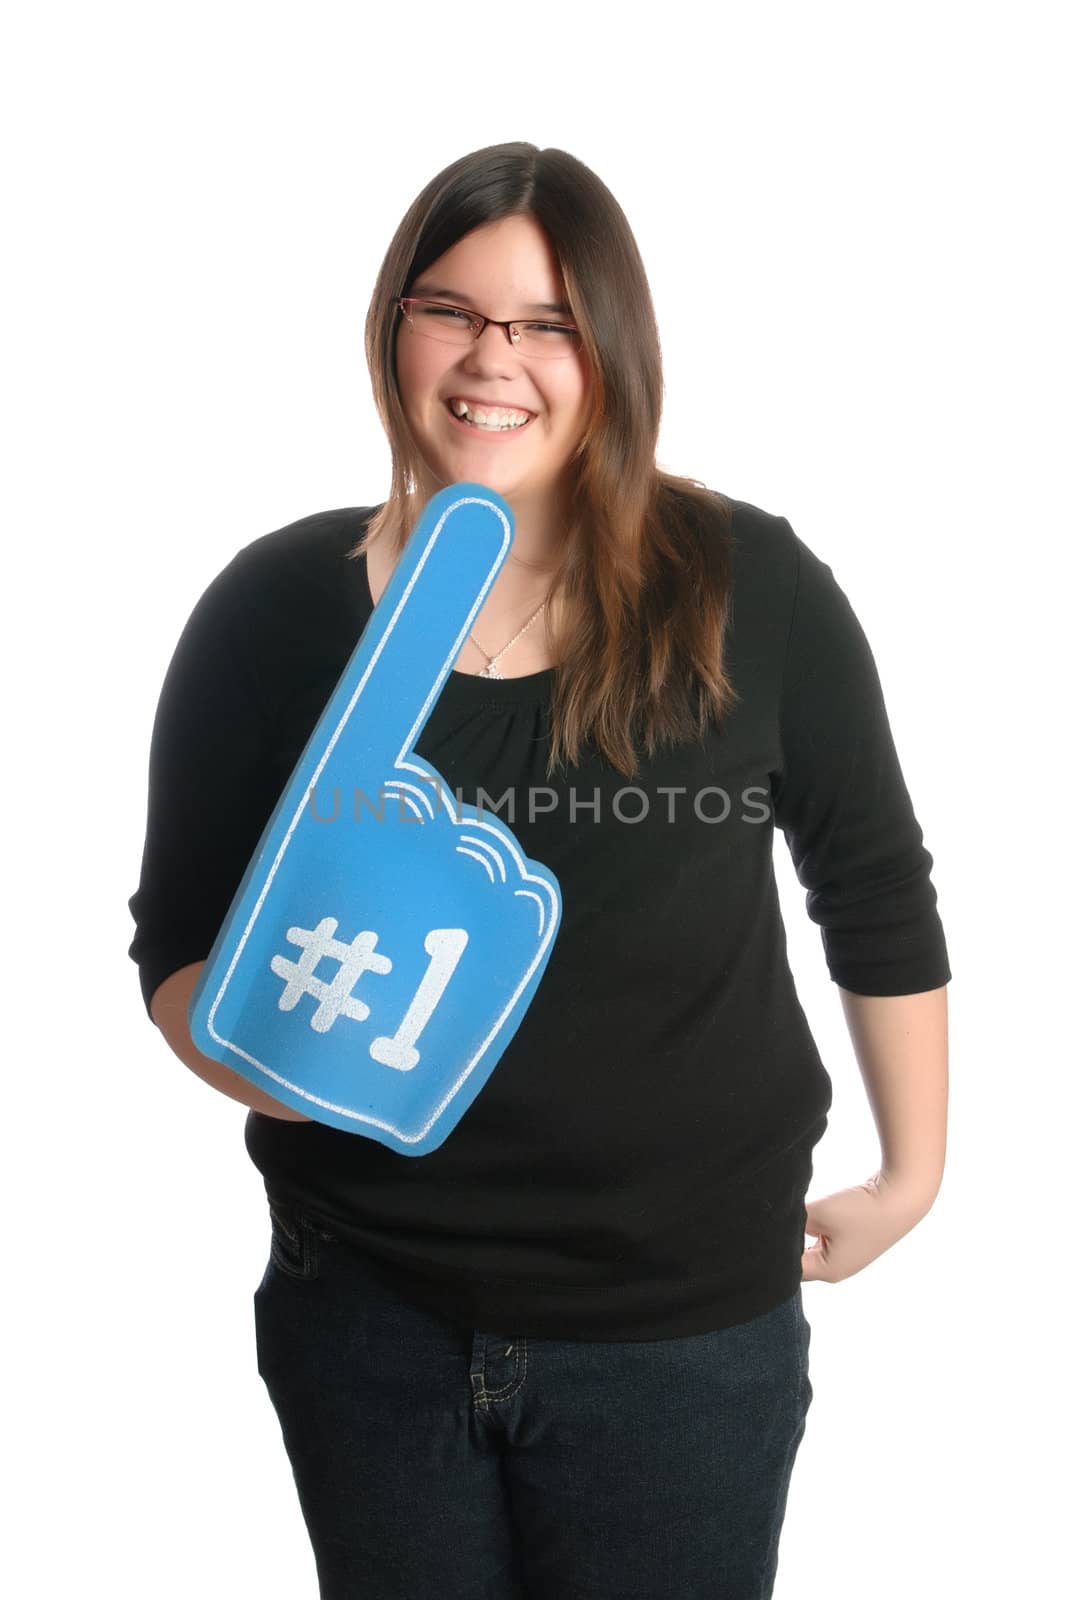 A smiling teenage girl is holding a large foam hand showing that she is number one, isolated against a white background.